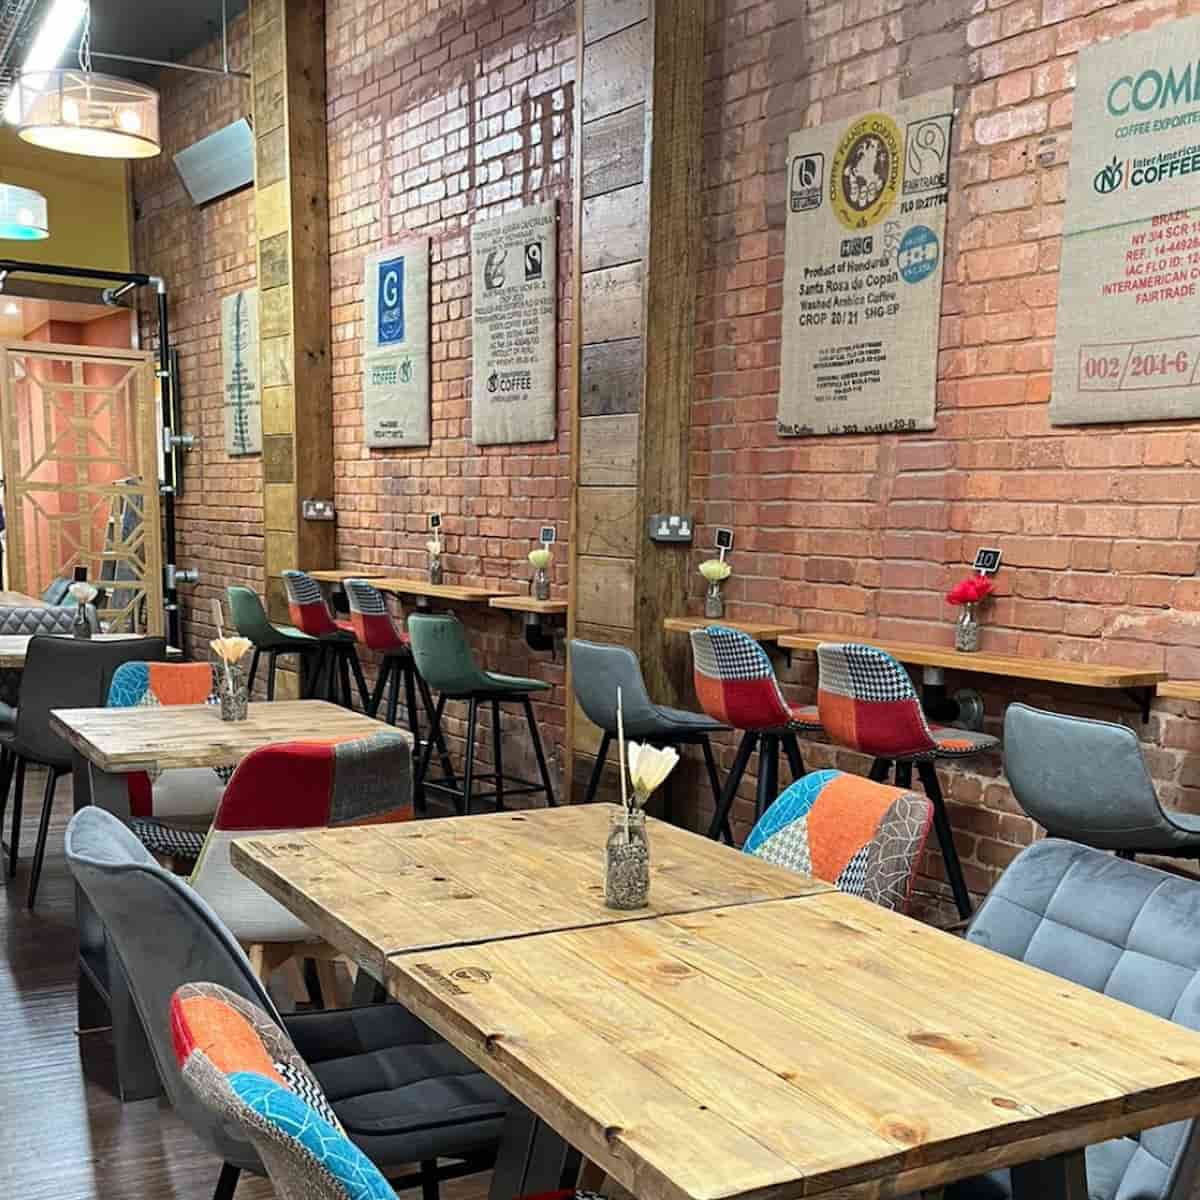 Wood-topped cafe tables in Understated coffee shop, surrounded by orange, turquoise and black and white pattern chairs. In the background, a plain brick wall and pictures made from coffee sacks